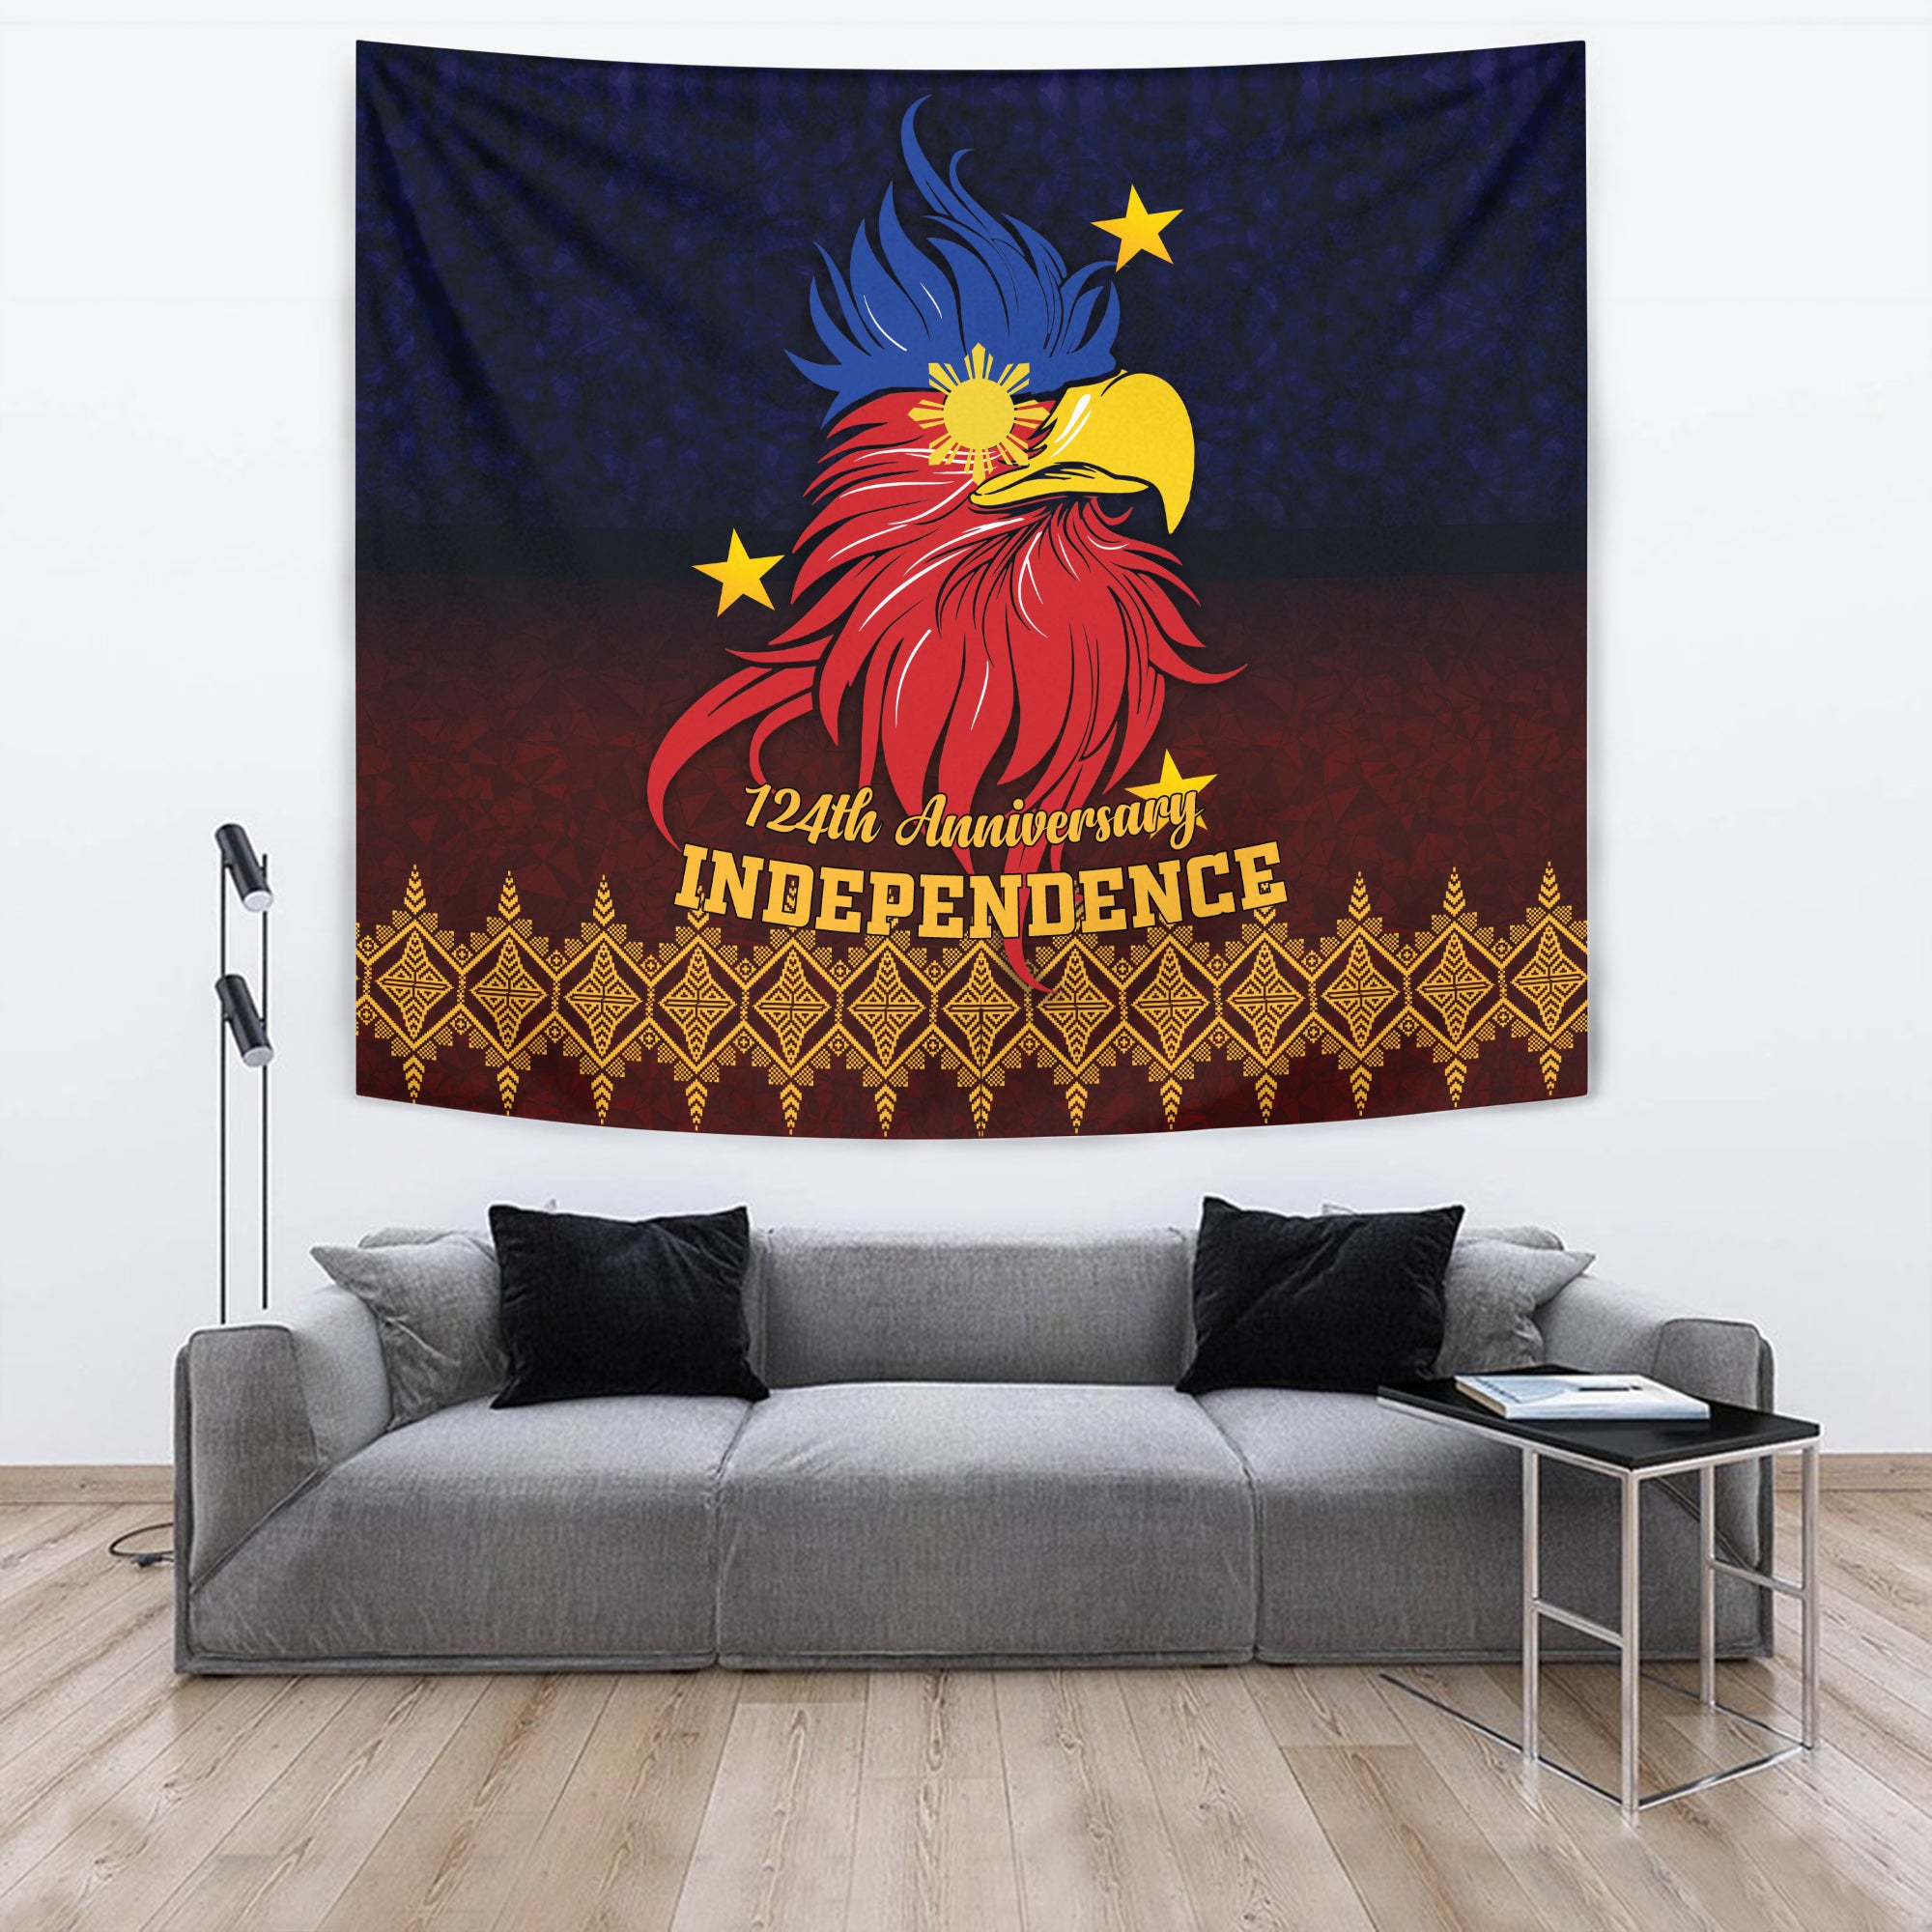 The Philippines Independence Anniversary 124th Years Tapestry - LT12 Wall Tapestry Blue - Polynesian Pride